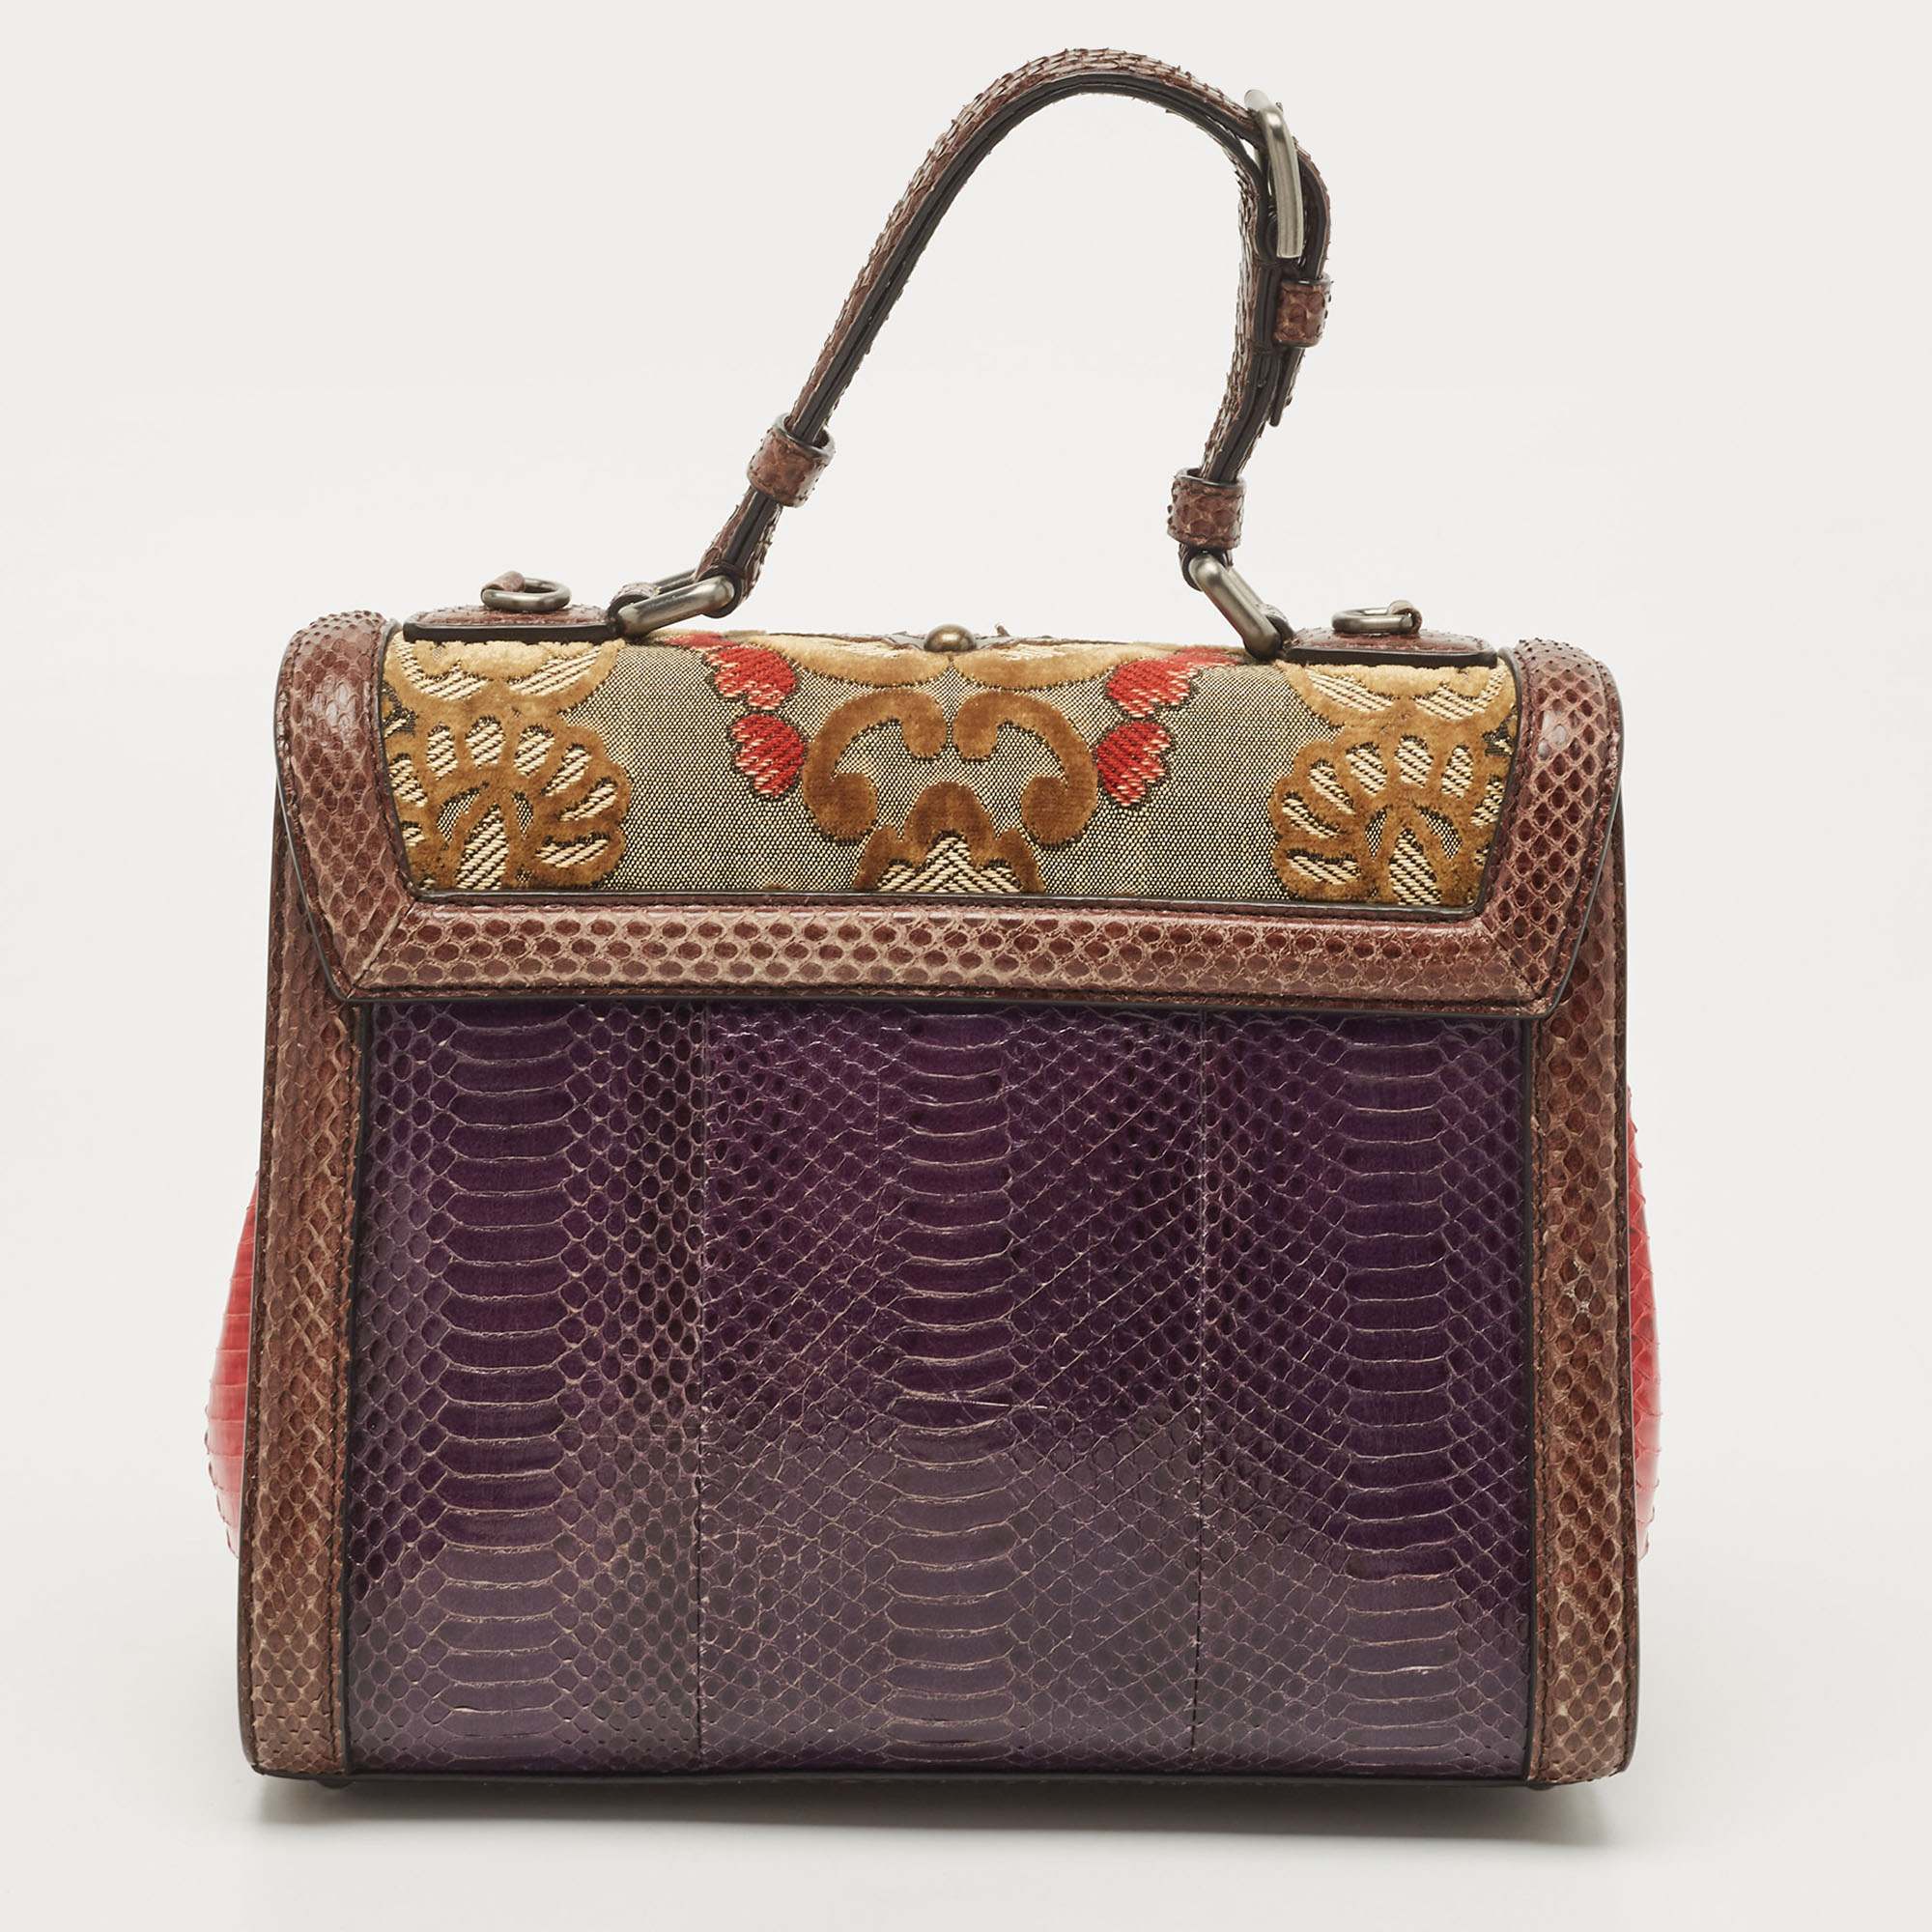 Dolce & Gabbana Multicolor Watersnake Leather And Brocade Fabric Medium Monica Top Handle Bag